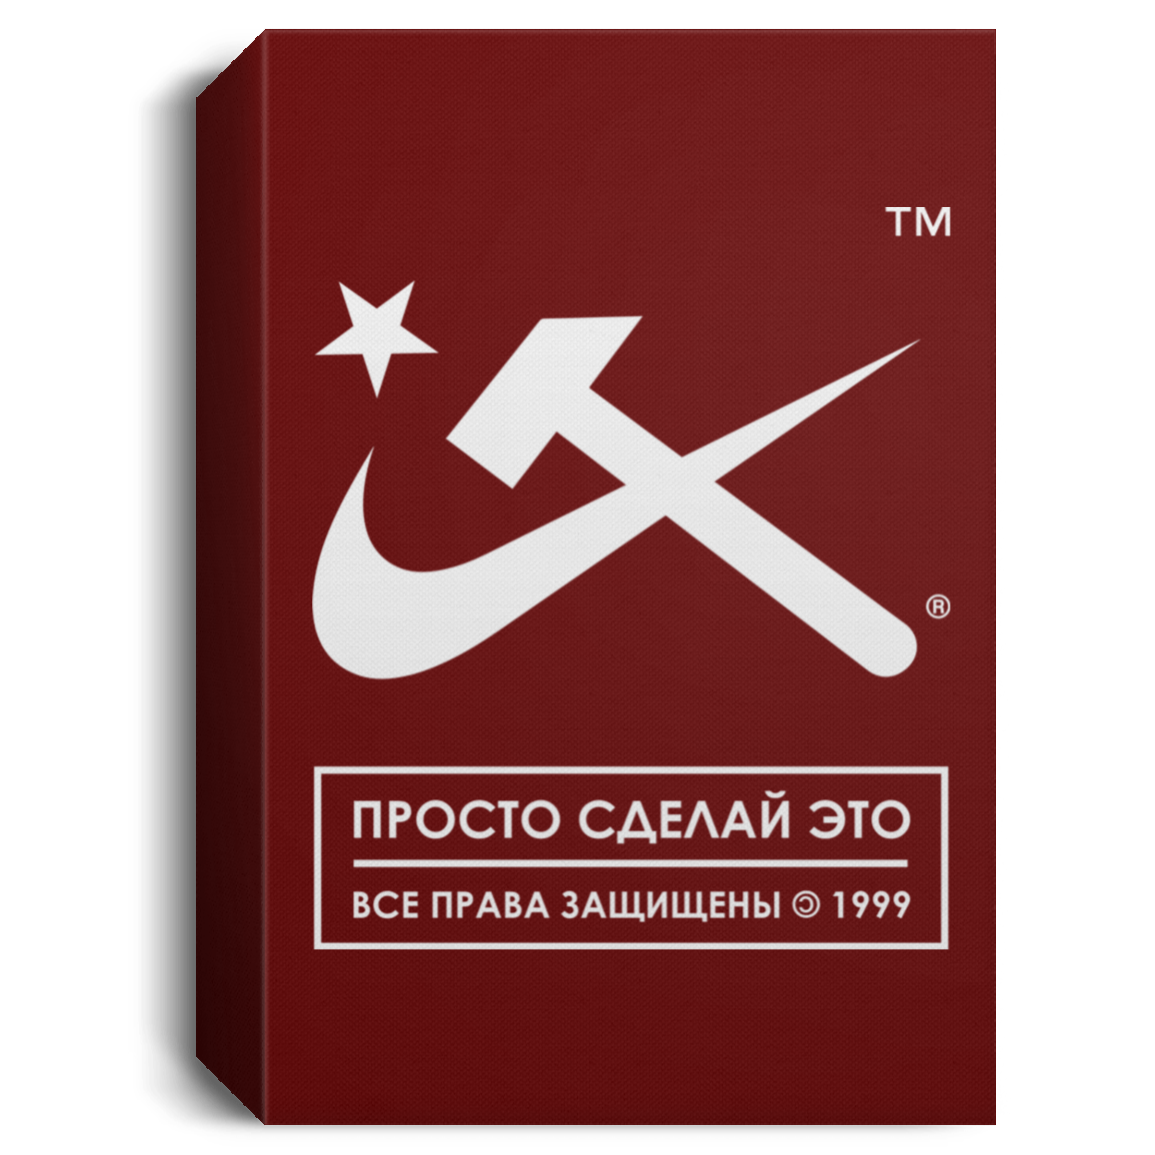 Aesthetic Hammer and Sickle Deluxe Canvas Art